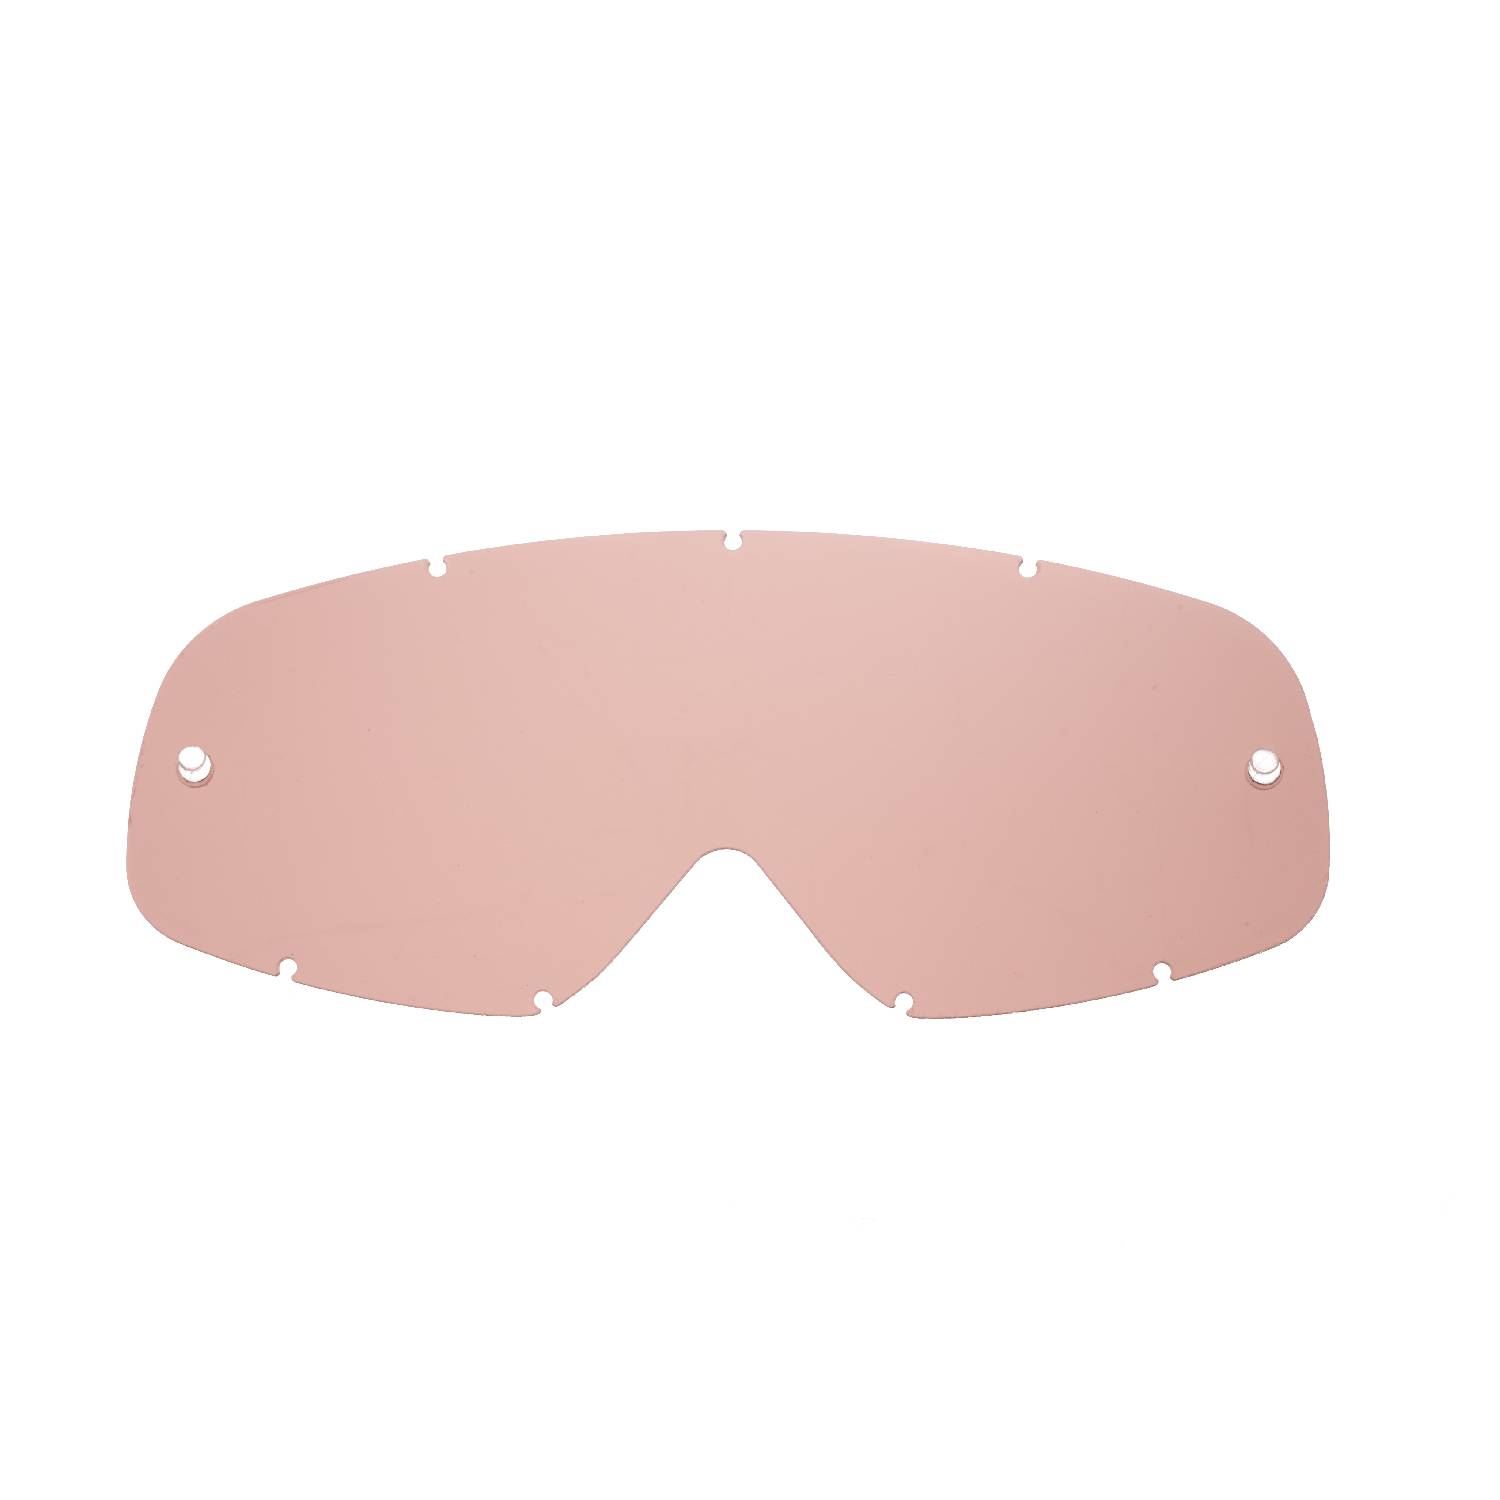 bronze replacement lenses for goggles compatible for Oakley O-frame goggle